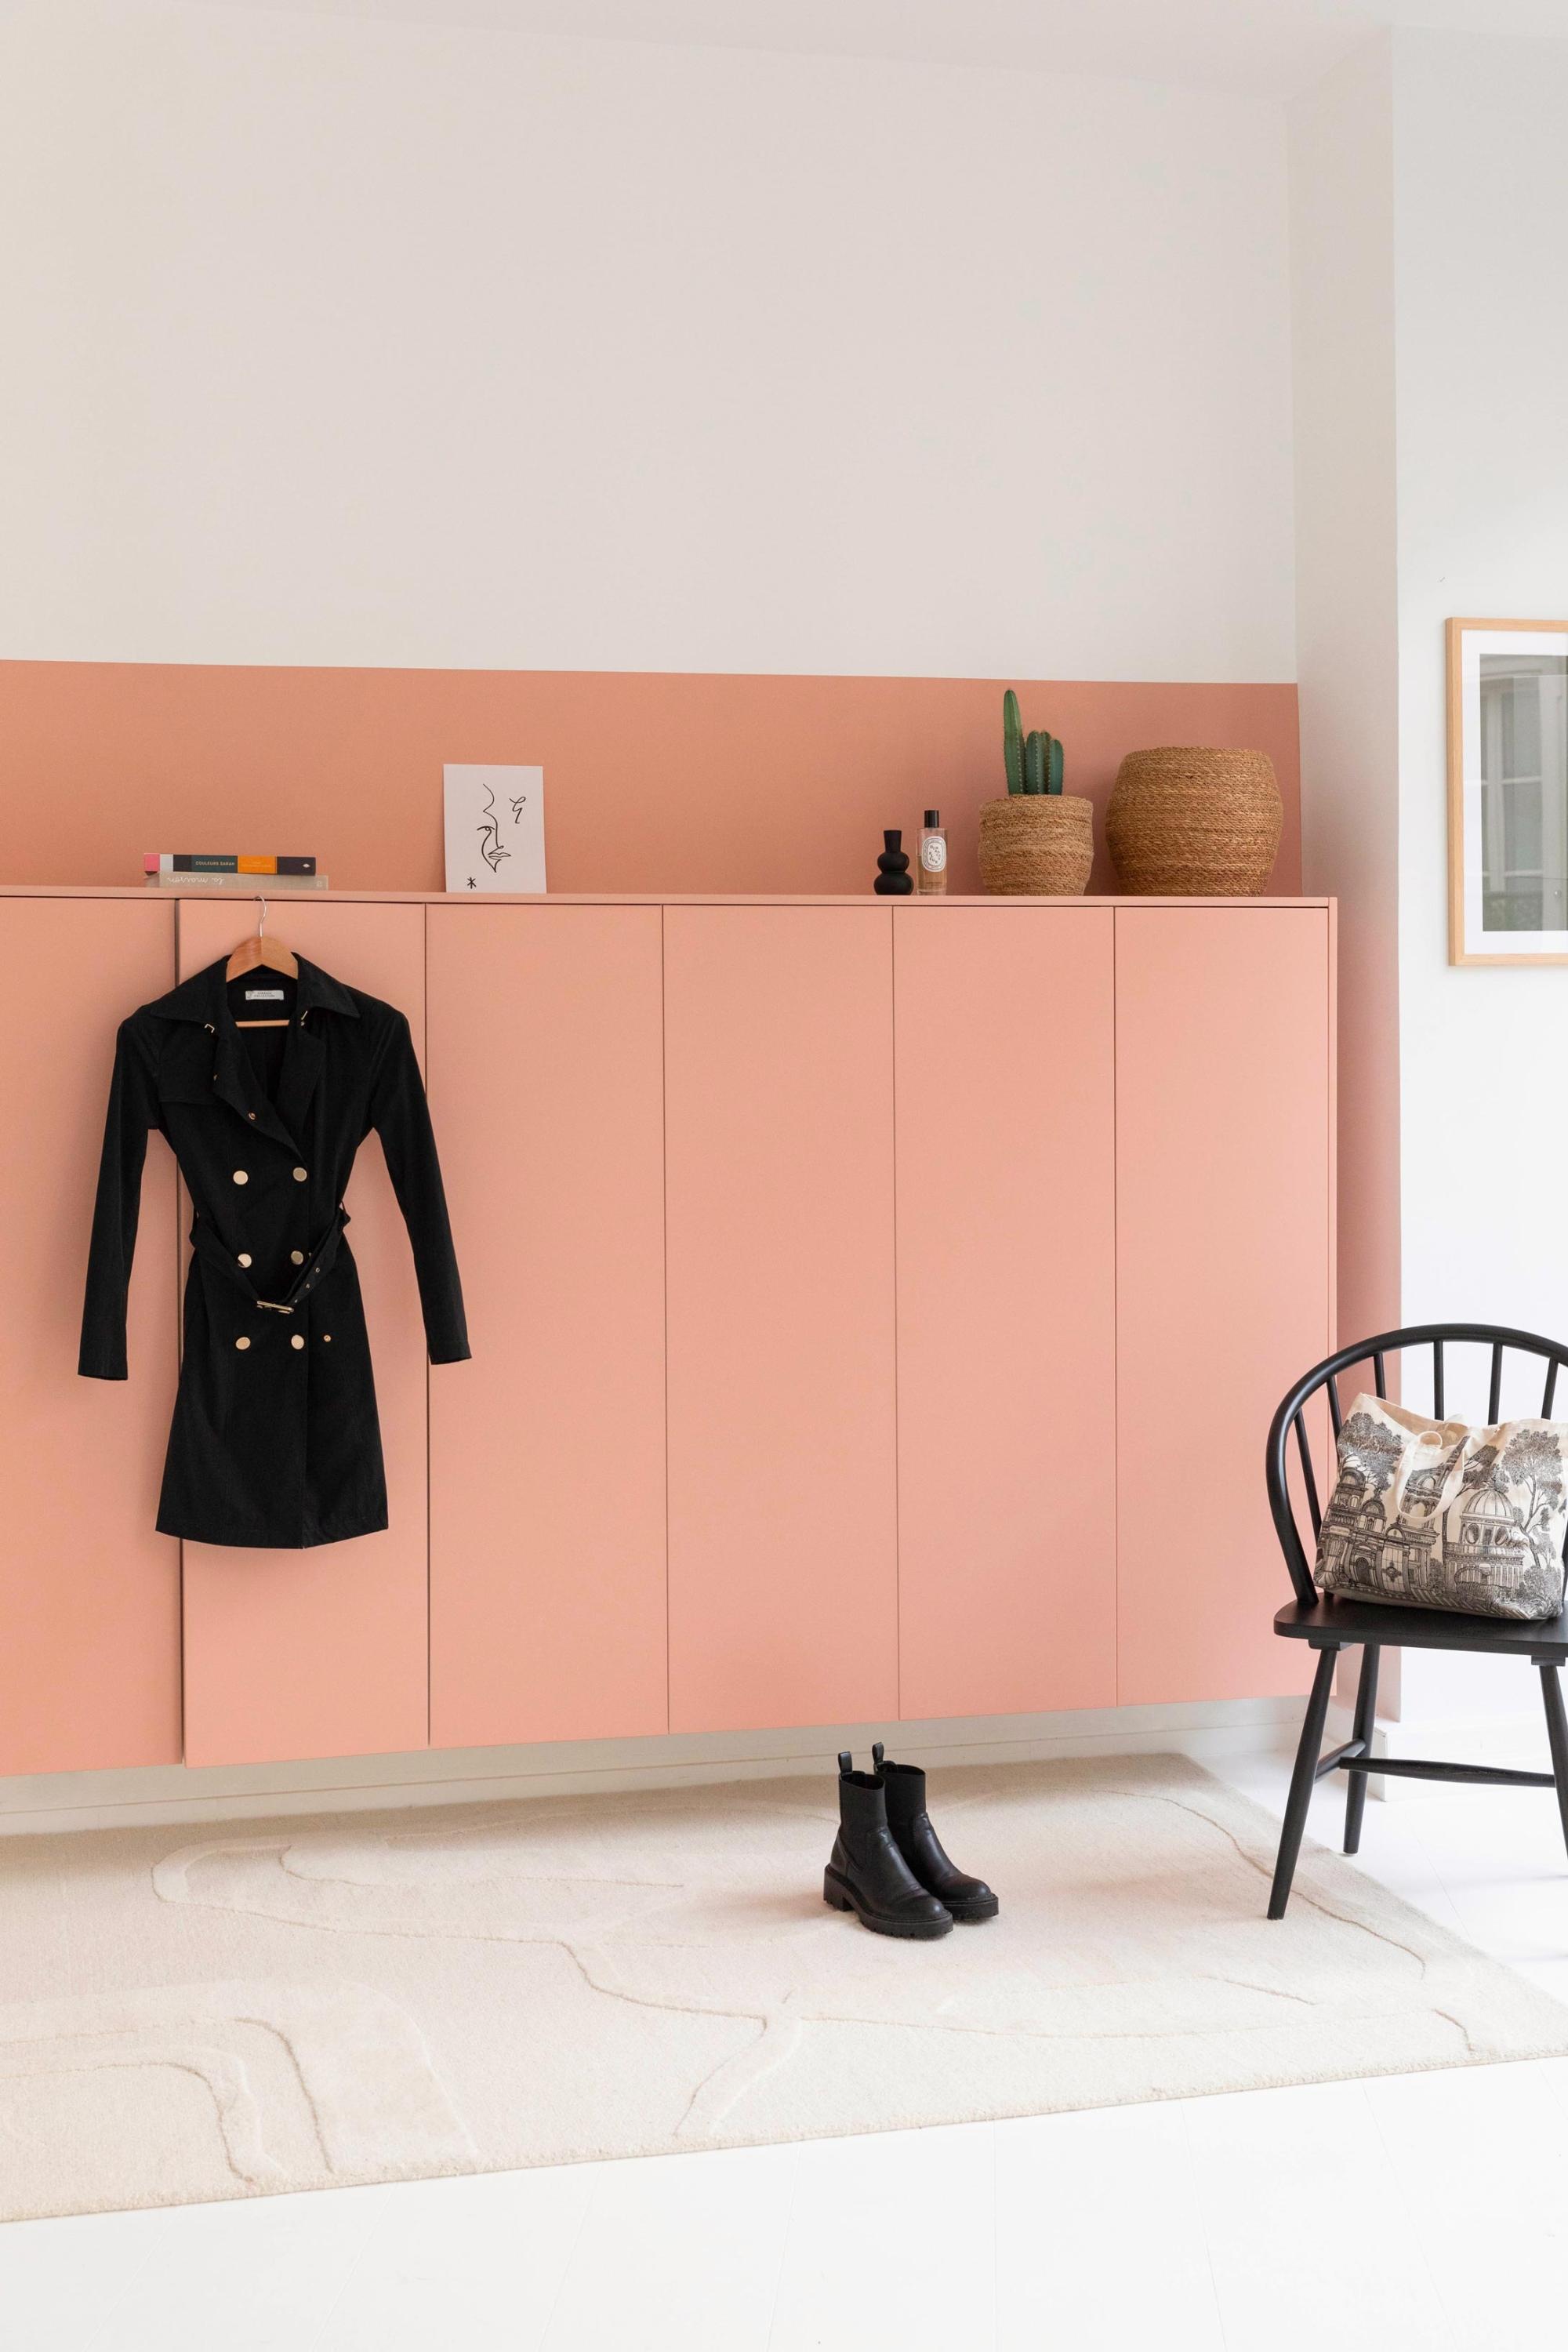 A half-height wardrobe in red 03 - Blush| Plum Living